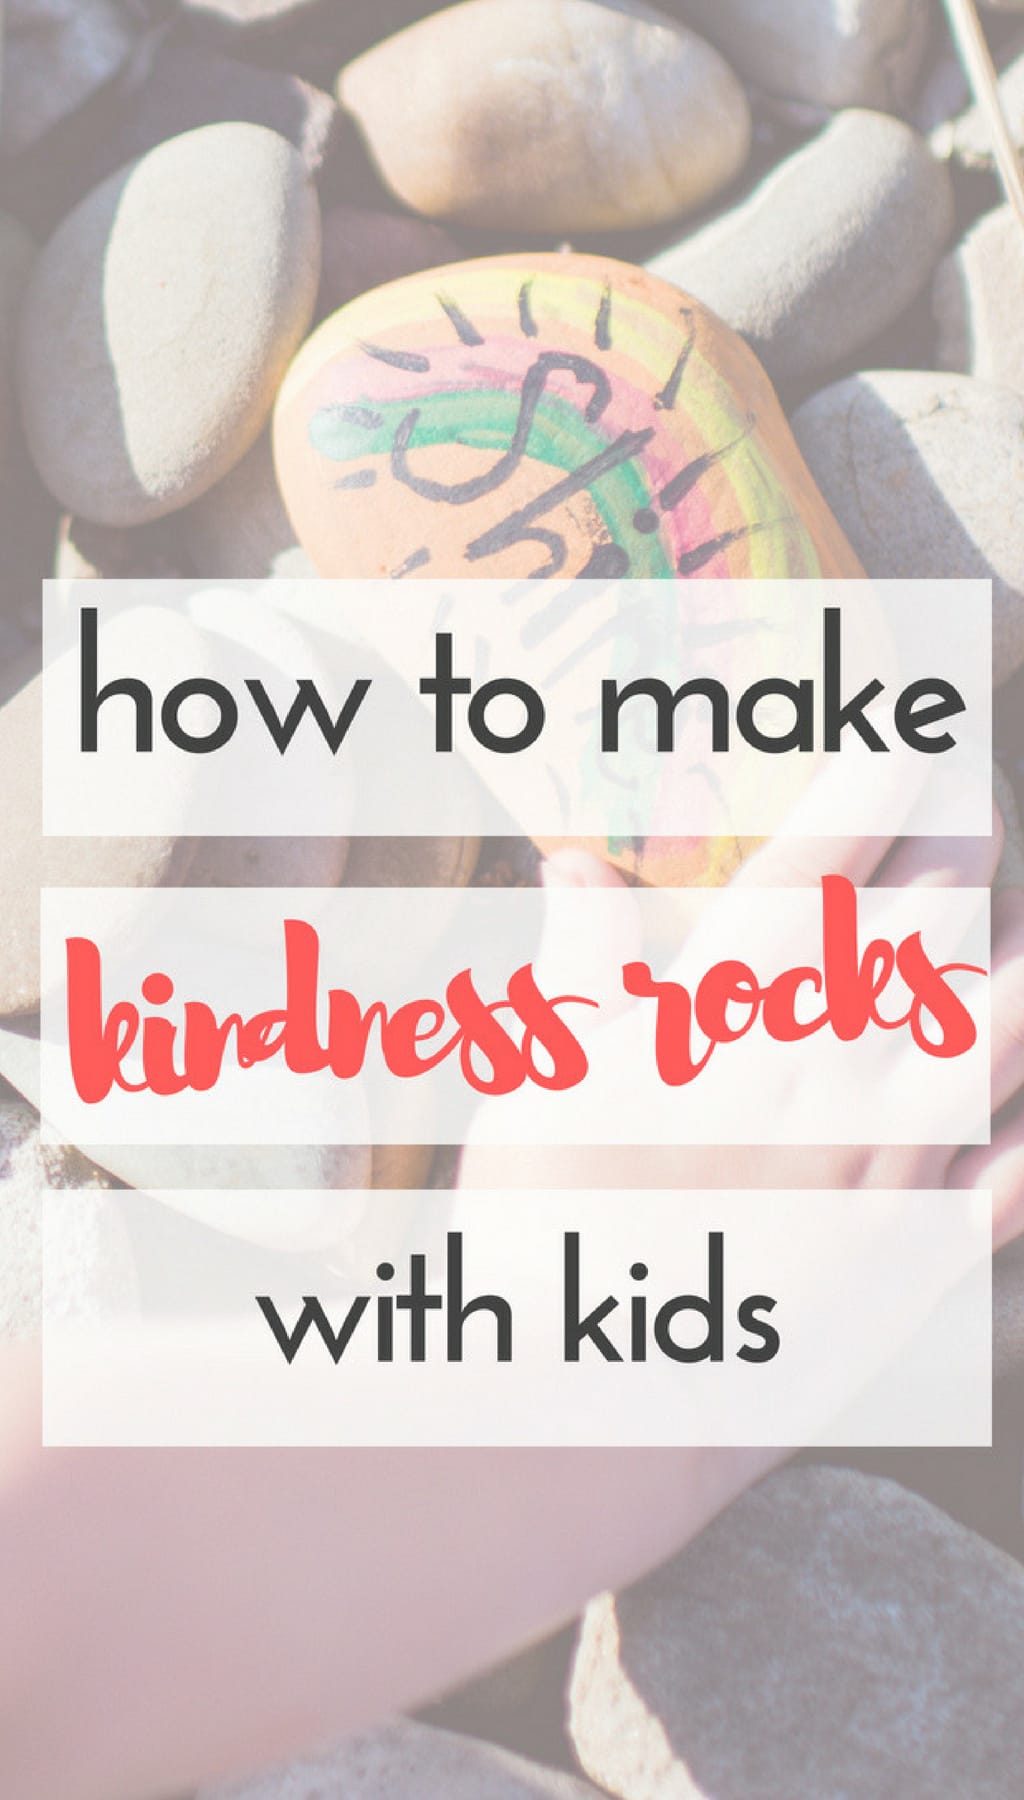 How to Make Kindness Rocks with Kids | If you haven't heard of The Kindness Rocks Project, it's a really cool concept. You create rocks with inspirational sayings or words of kindness, and then place them in places where others can find them. #kindness #rocks #kids #activities #crafts